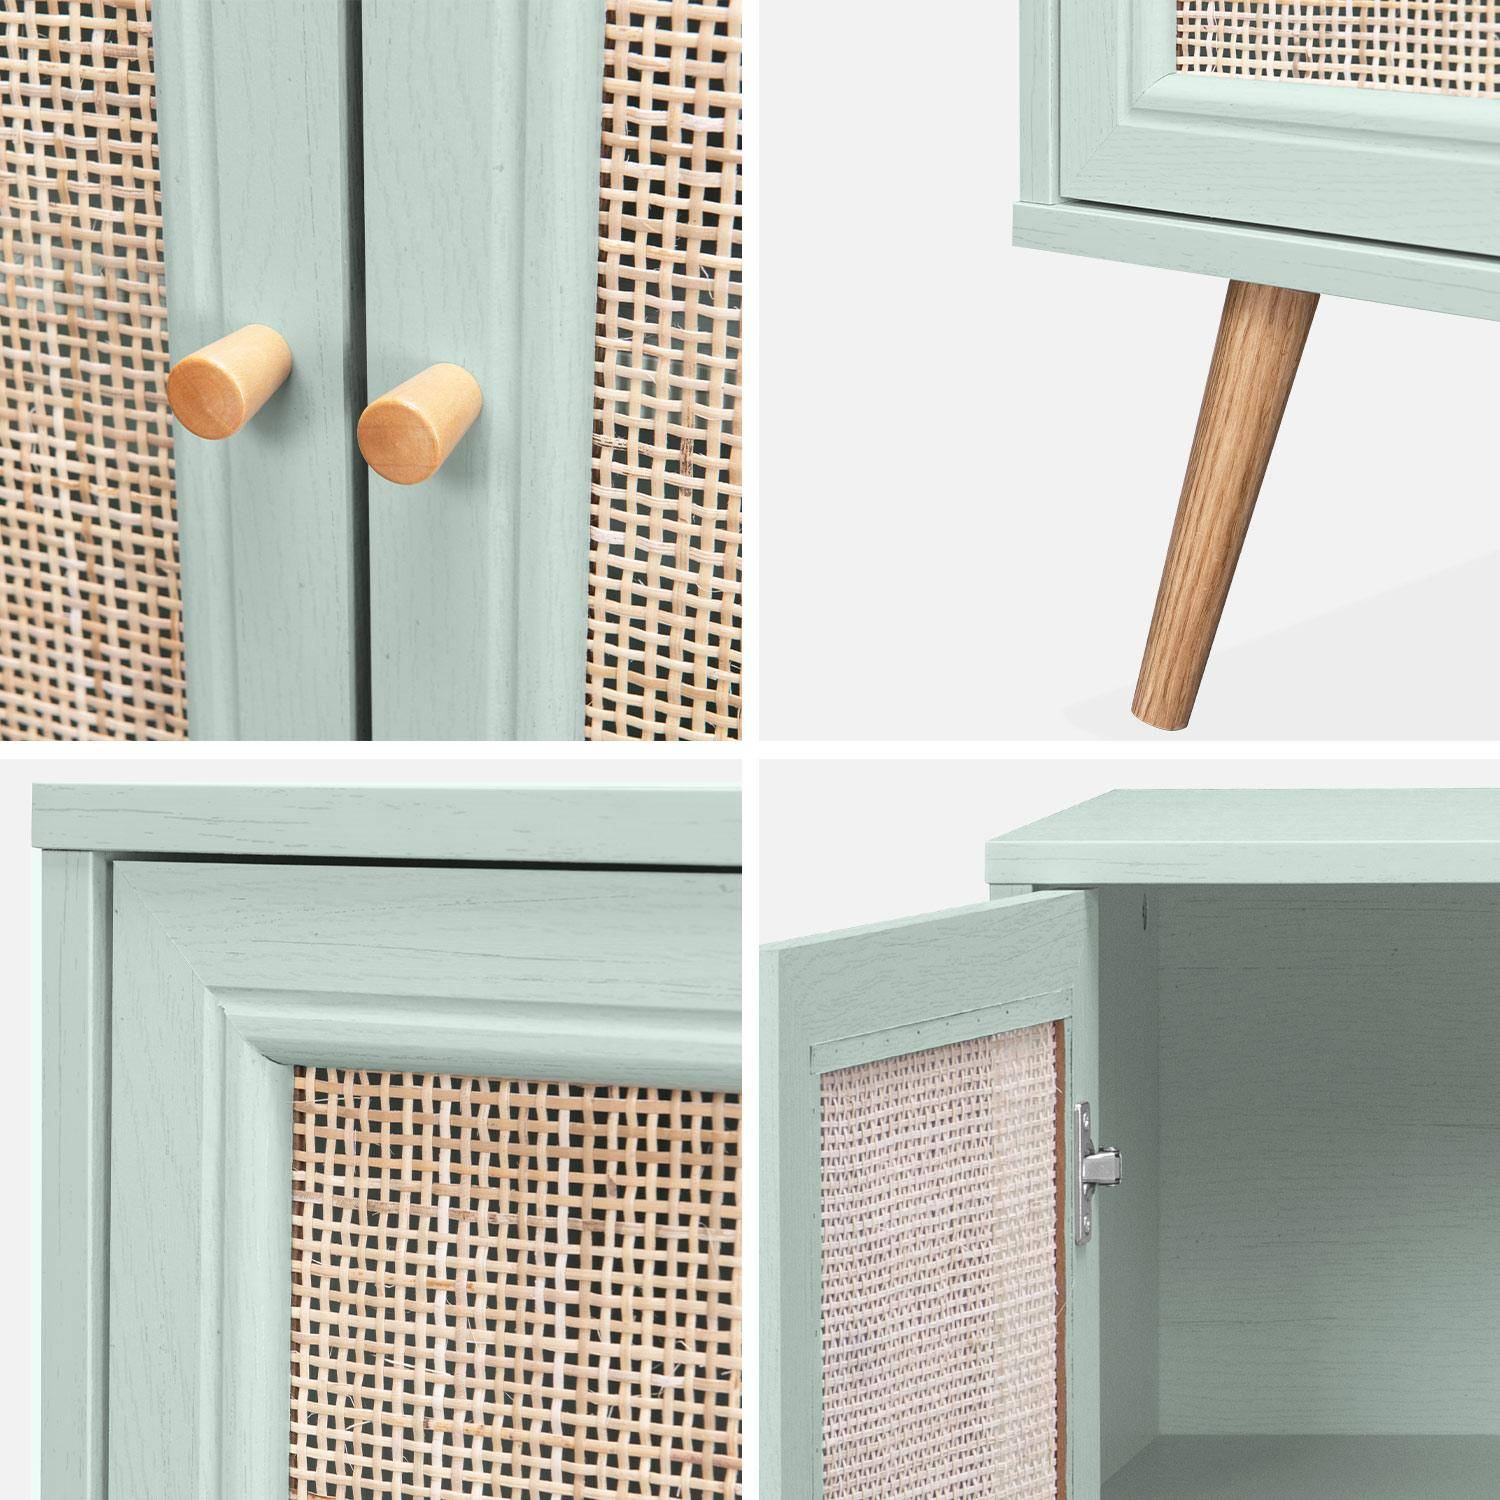 Wooden and cane rattan detail sideboard with 3 doors, 2 shelves, Scandi-style legs, 120x39x70cm - Boheme - Pastel Green Photo6